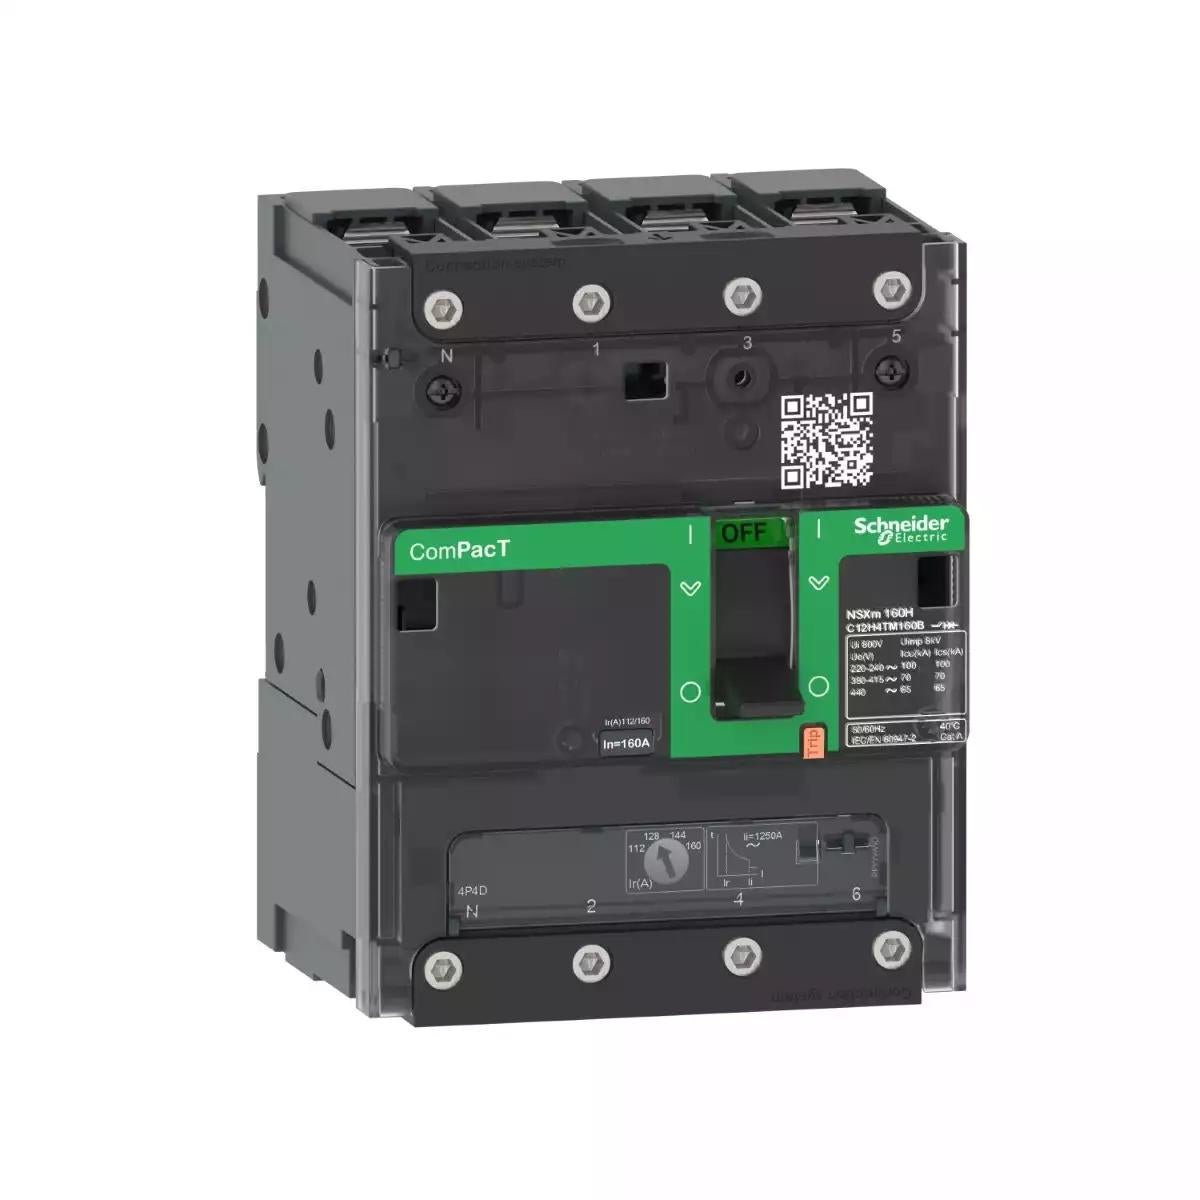 Schneider Electric Circuit breaker ComPacT NSXm N (50kA at 415VAC), 4 Poles 3d, 50A rating TMD trip unit, compression lugs and busbar connectors